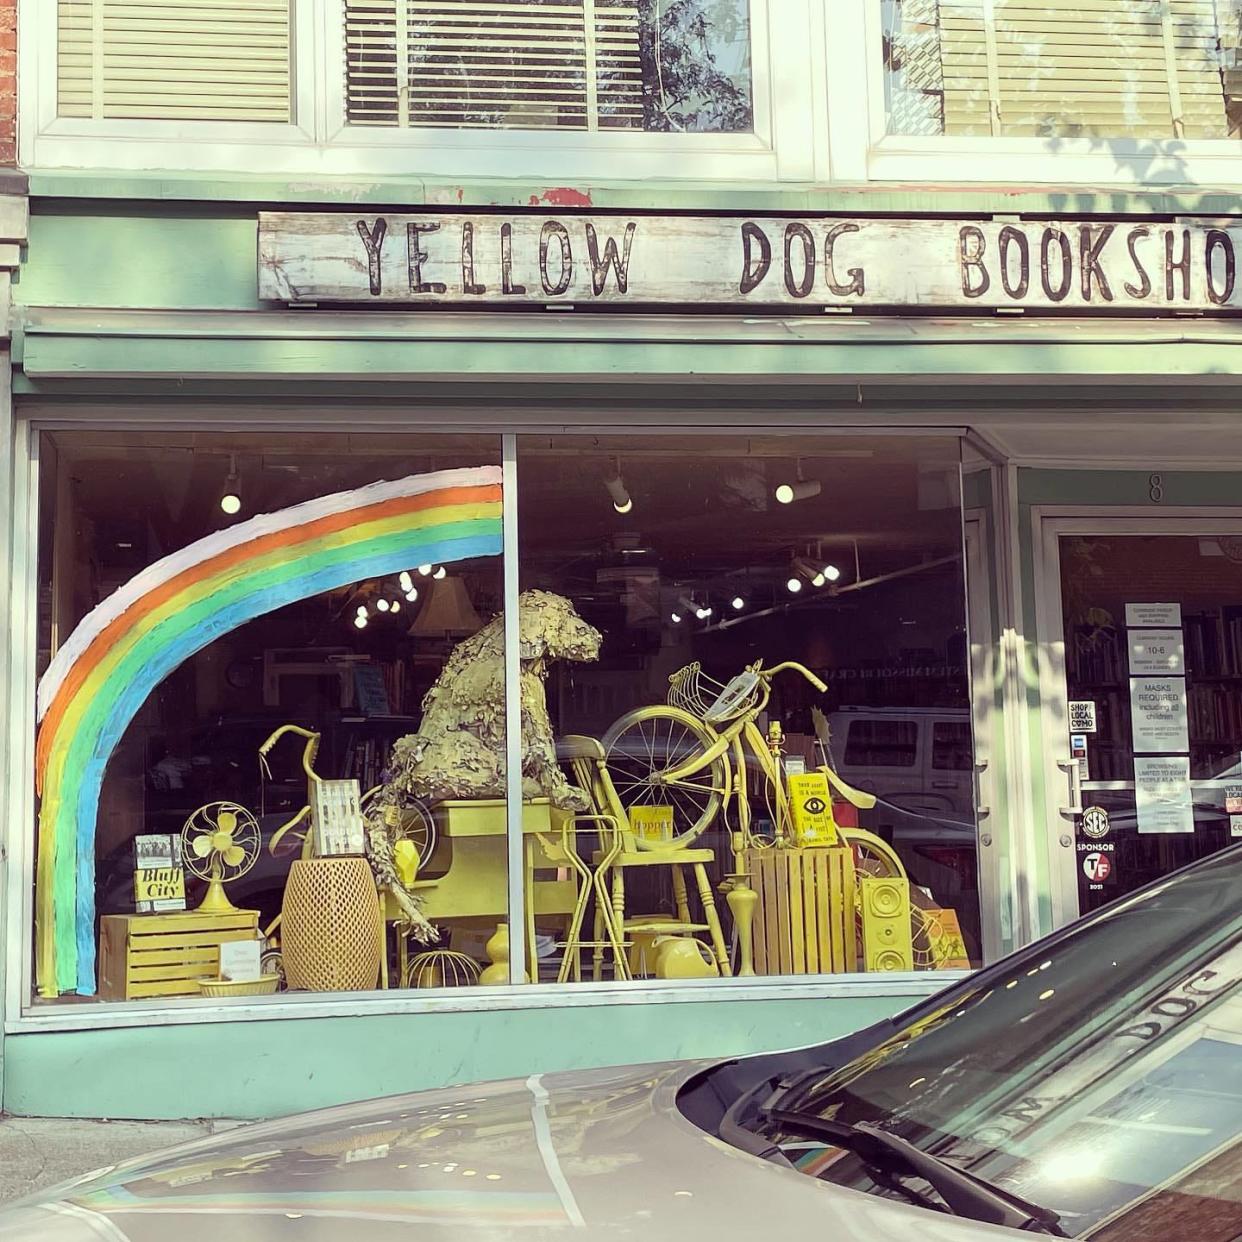 Yellow Dog Bookshop always creates inventive window displays, but steps it up even further for its birthday celebrations.